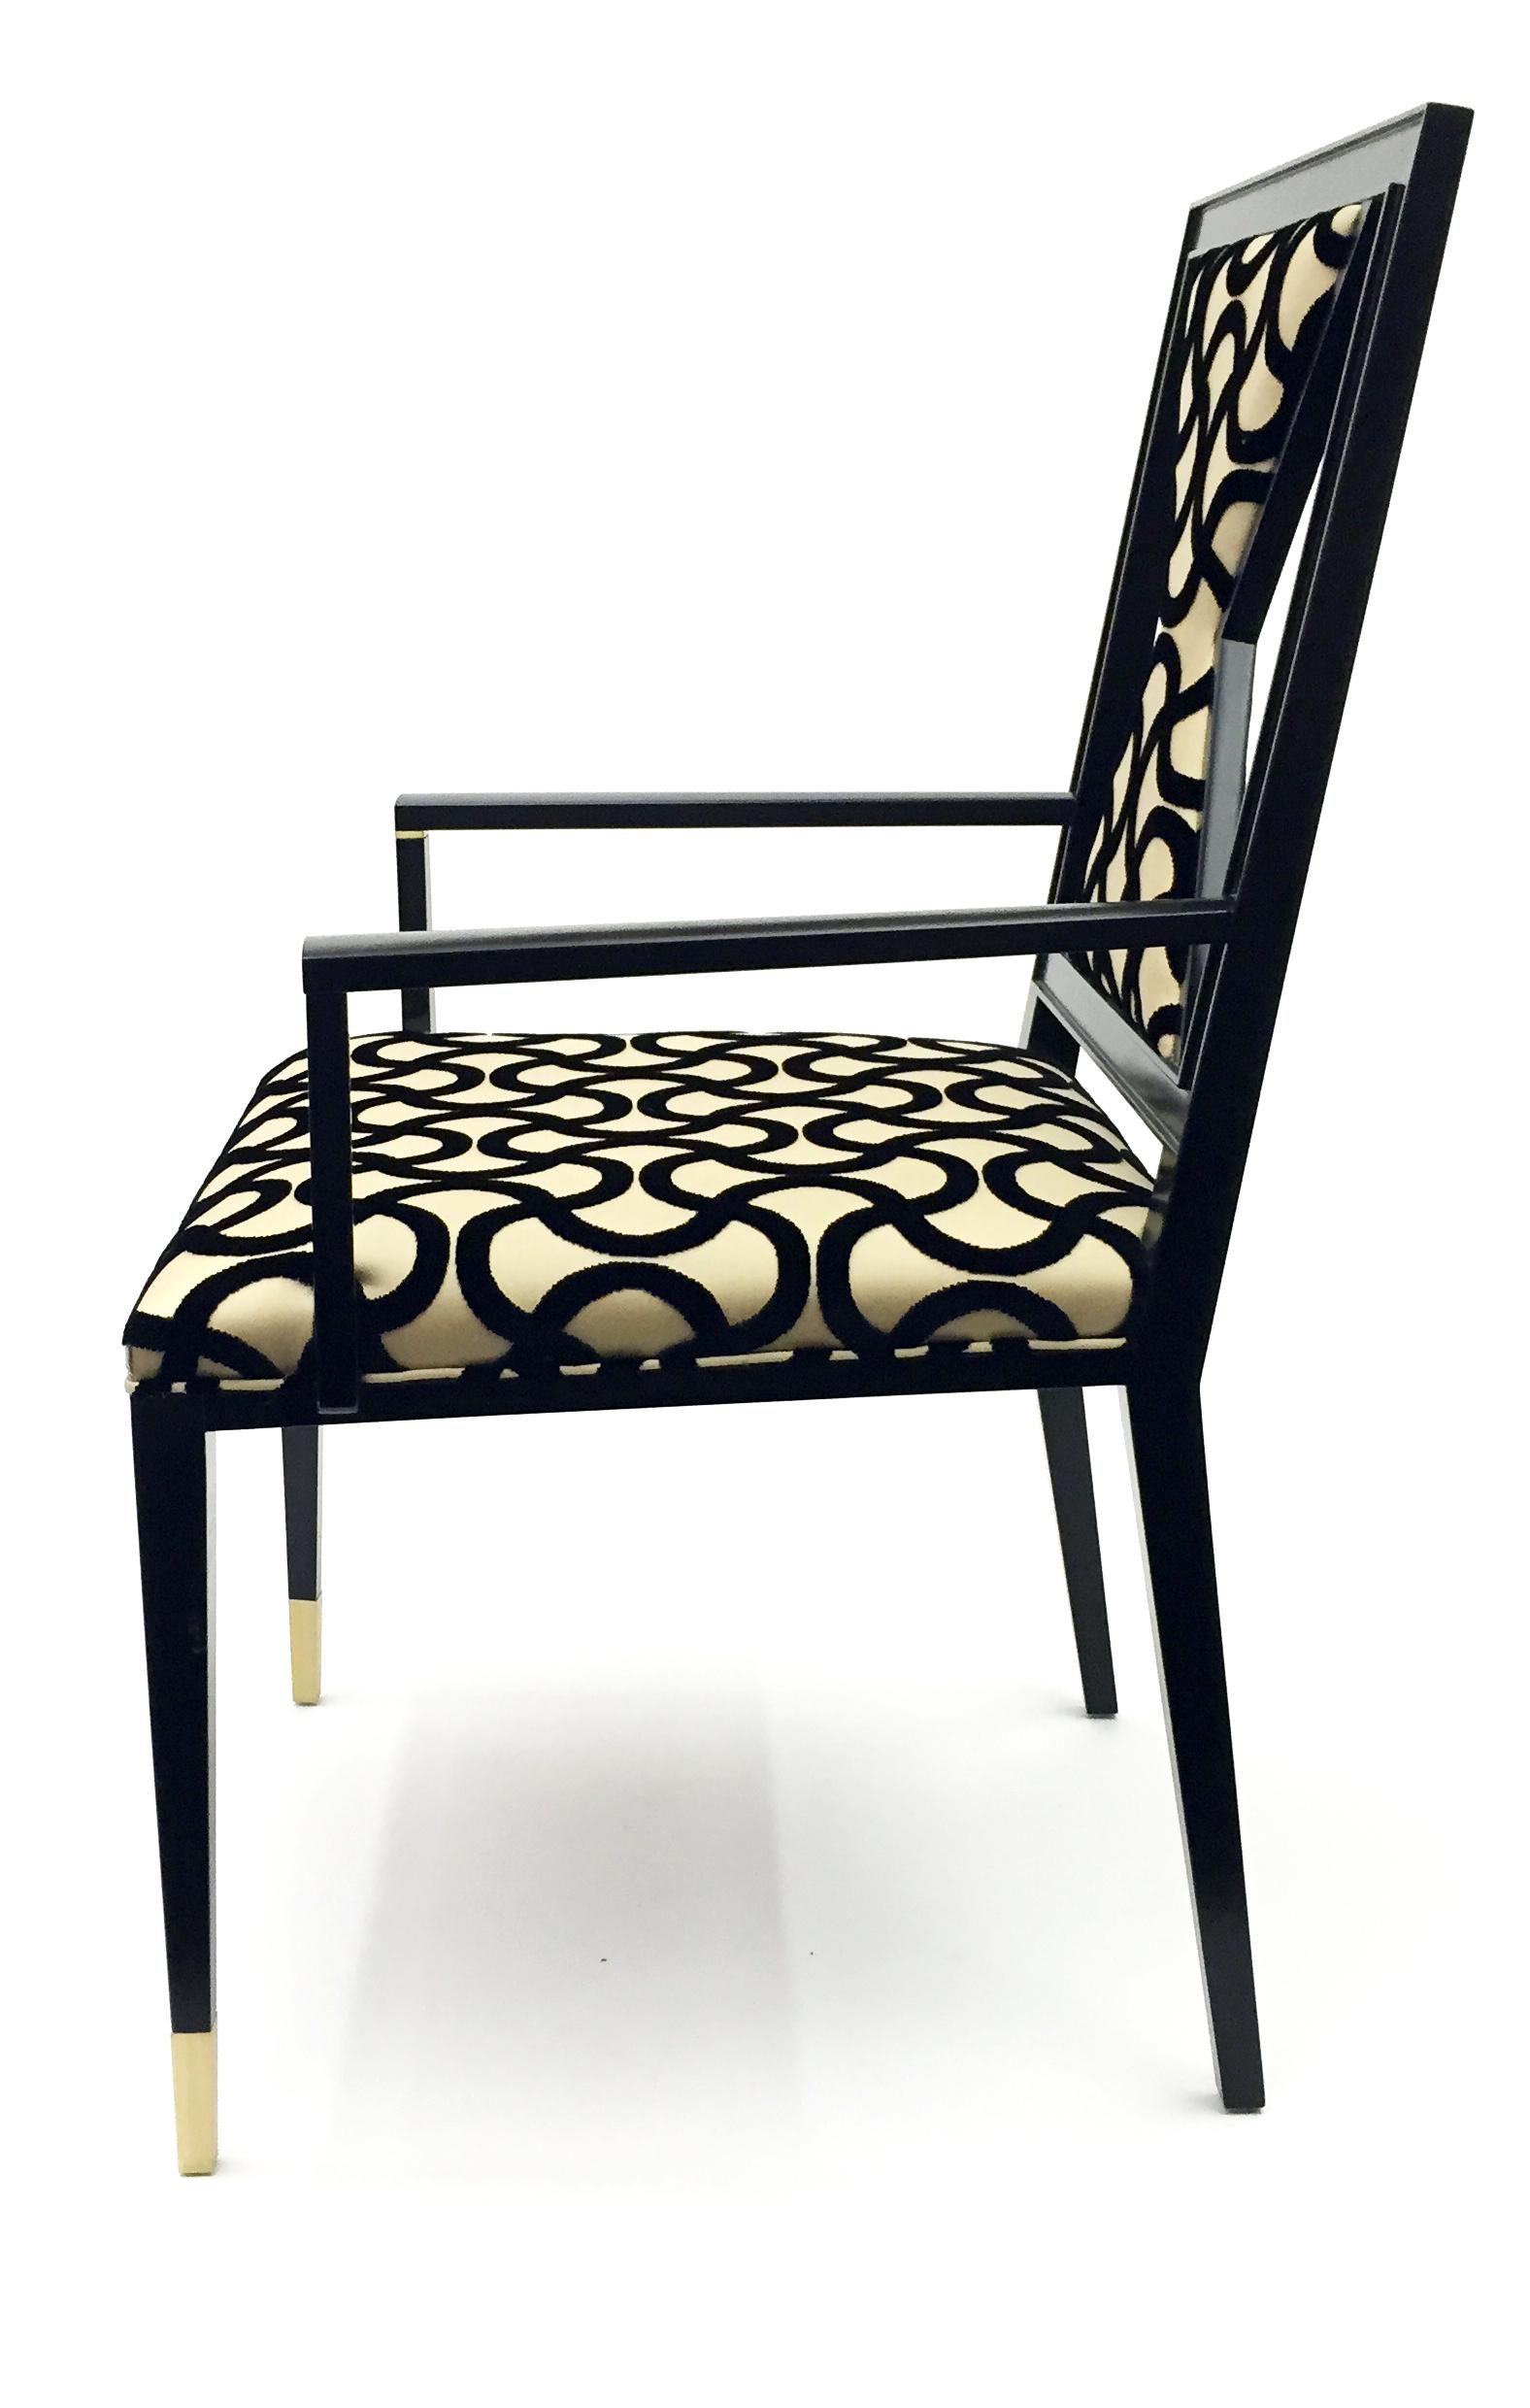 Contemporary wooden armchair design by Juan Montoya. This unique piece has brass details and a geometric shaped backrest. It is upholstered with a patterned fabric which was chosen by the designer to allow movement and bring character to the piece.